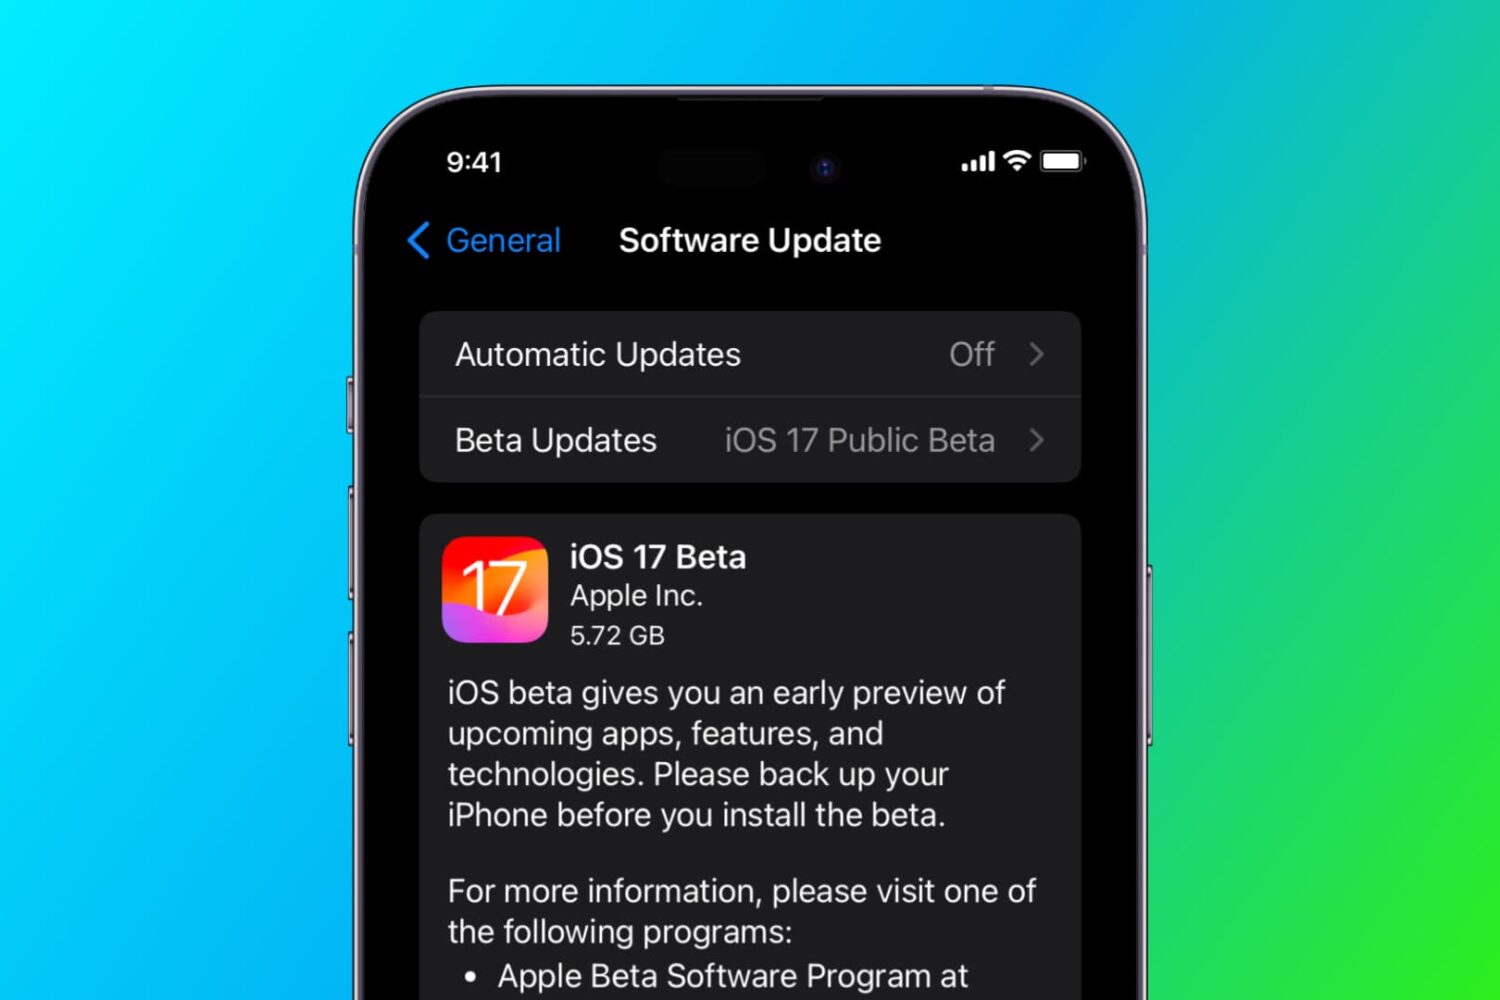 Software Update screen on iPhone showing iOS 17 public beta